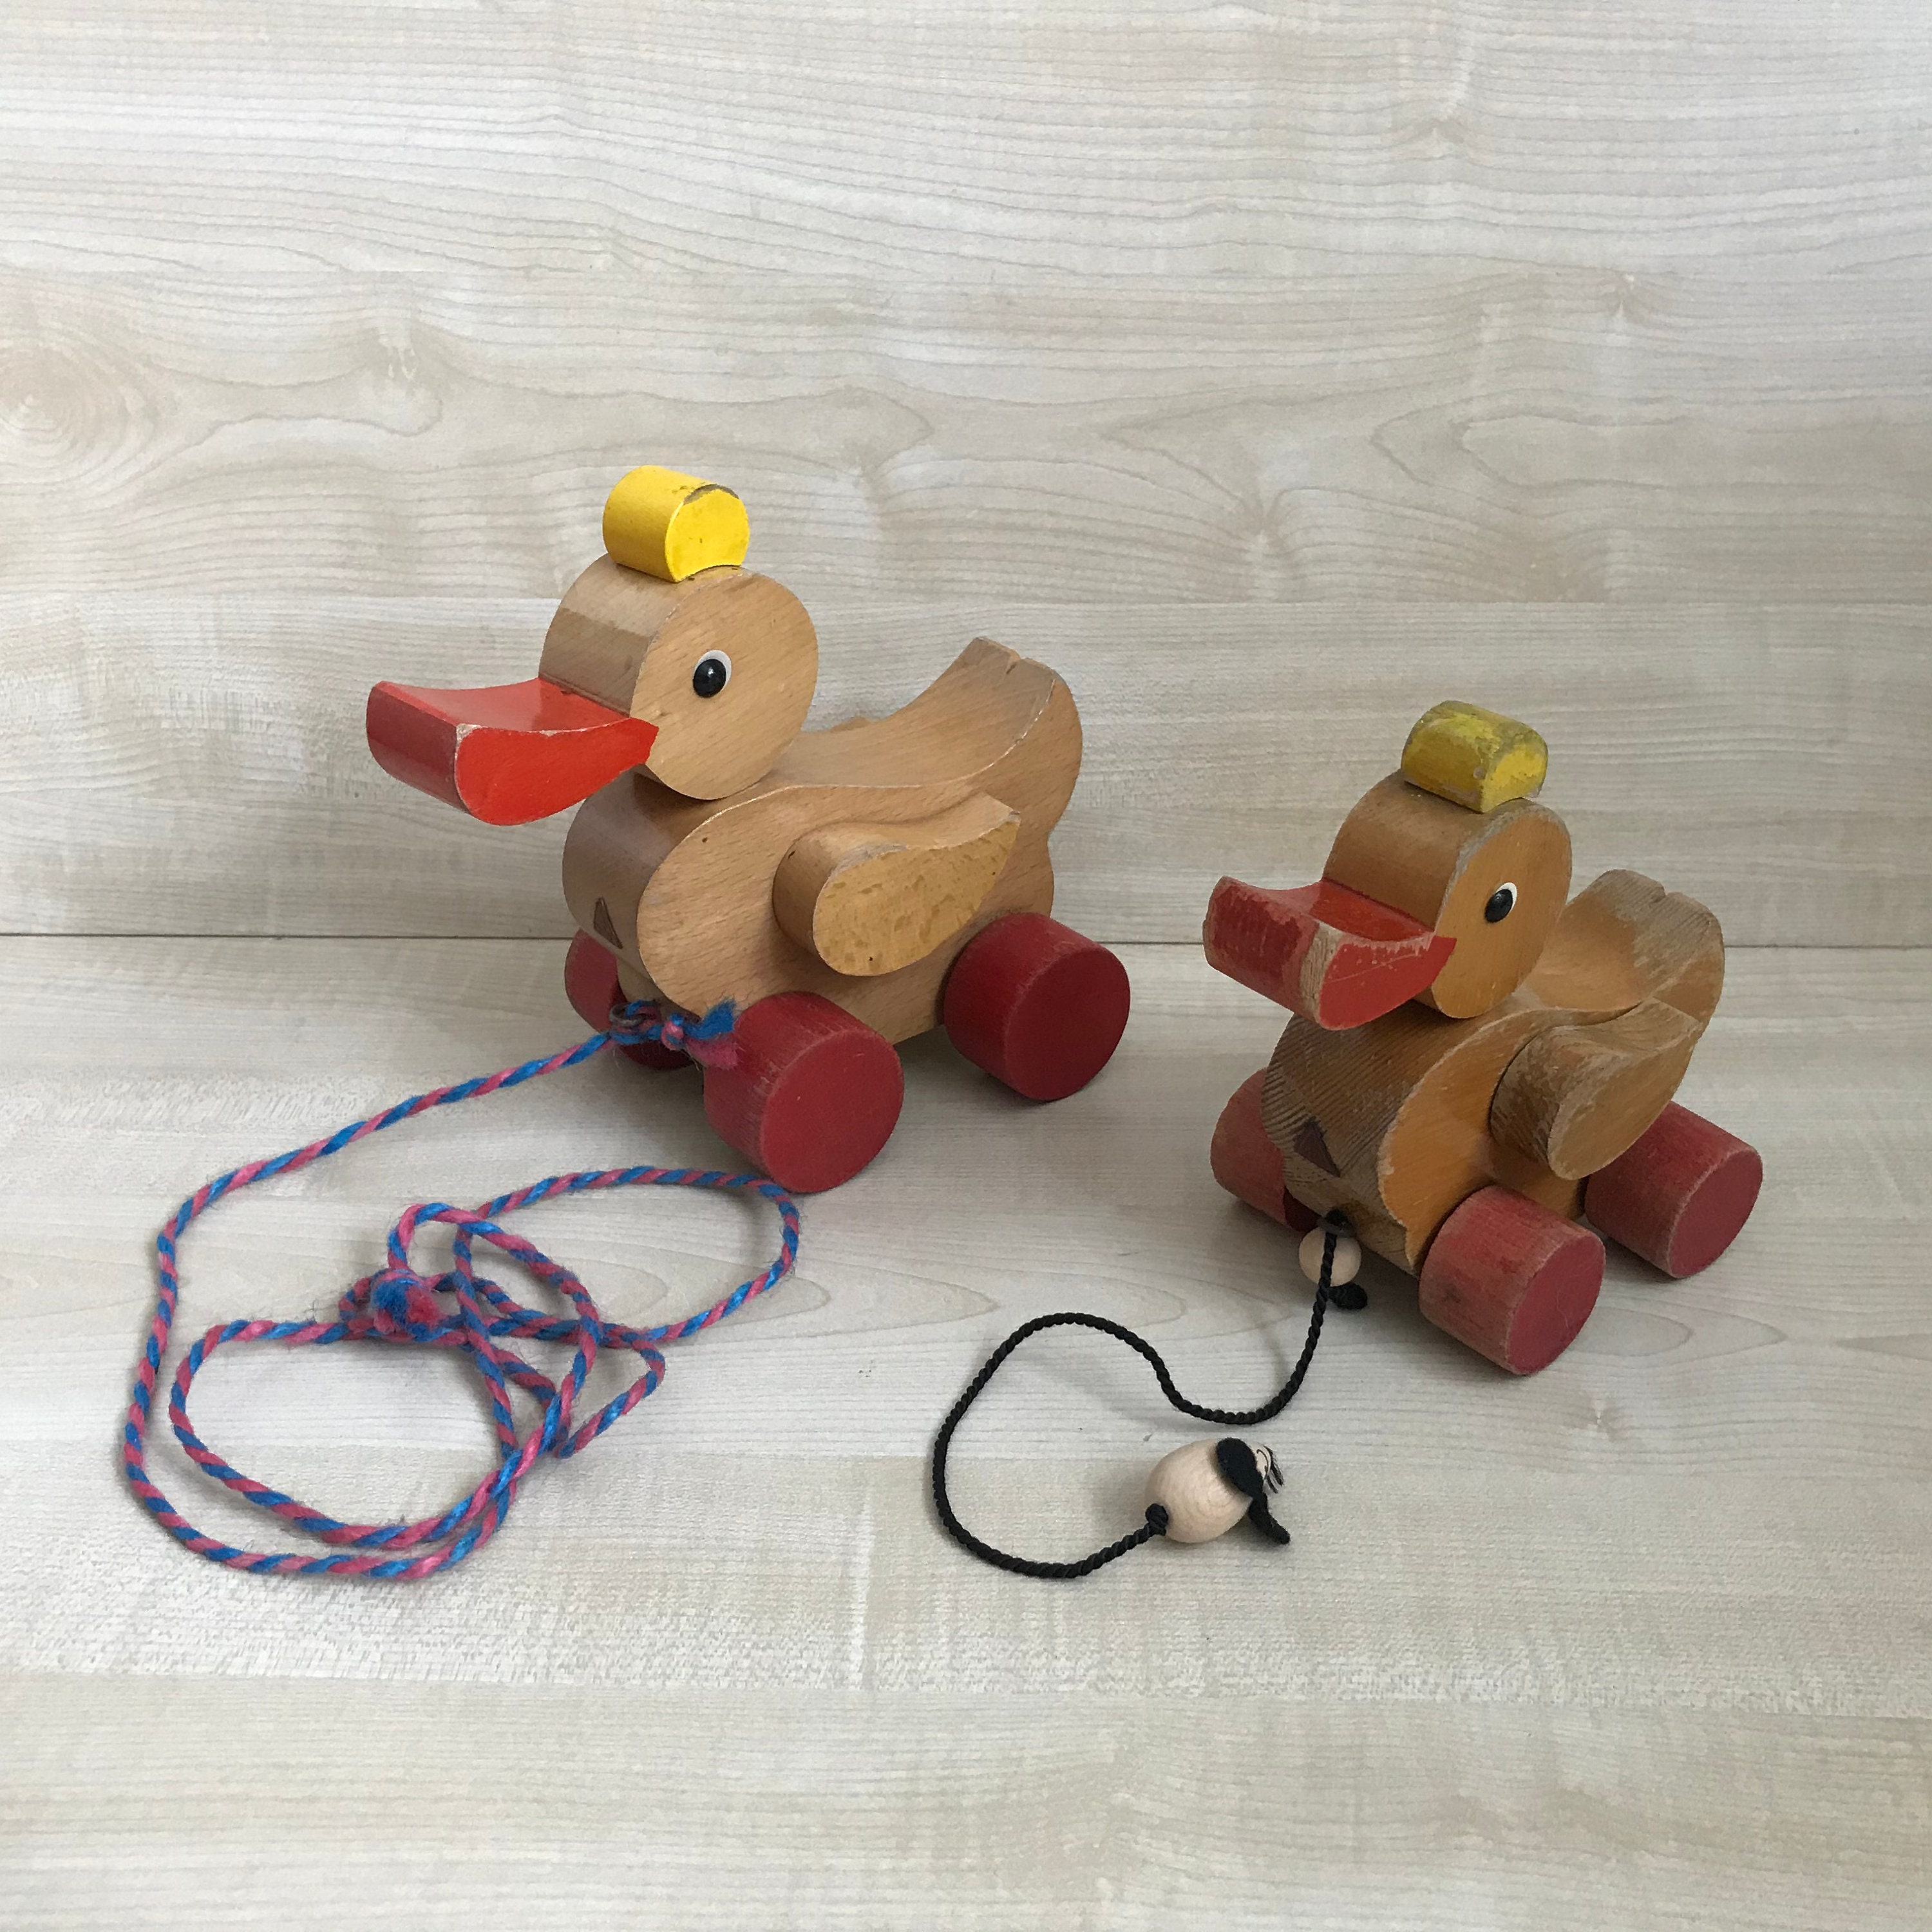 Wooden Toy, Toddler Push Toy, Pink Wooden Duck Toy, Best Push Toy for  Girls, Wooden Push Toy, Wood Kids Toys, Wooden Toys for Girl 